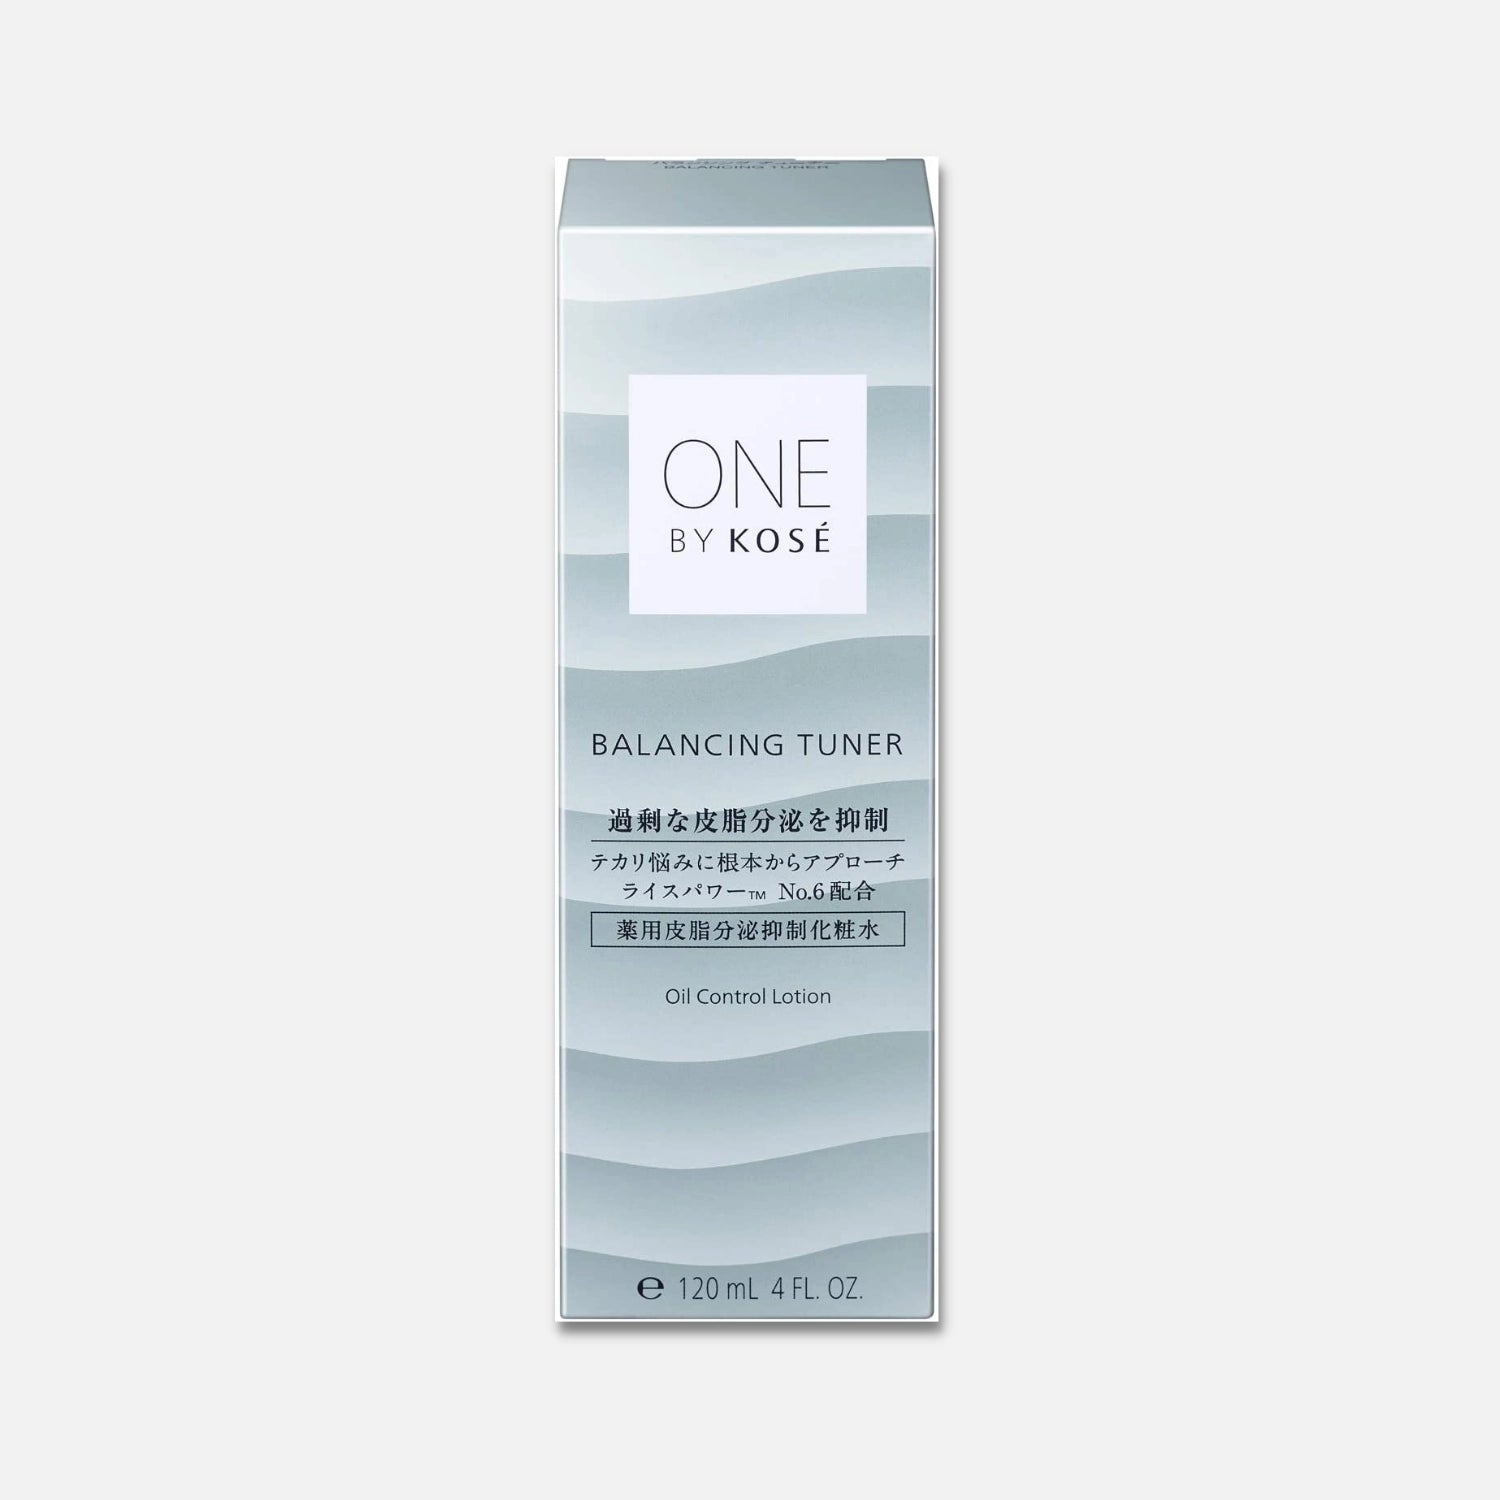 One by Kose Balancing Tuner Oil Control 120ml - Buy Me Japan